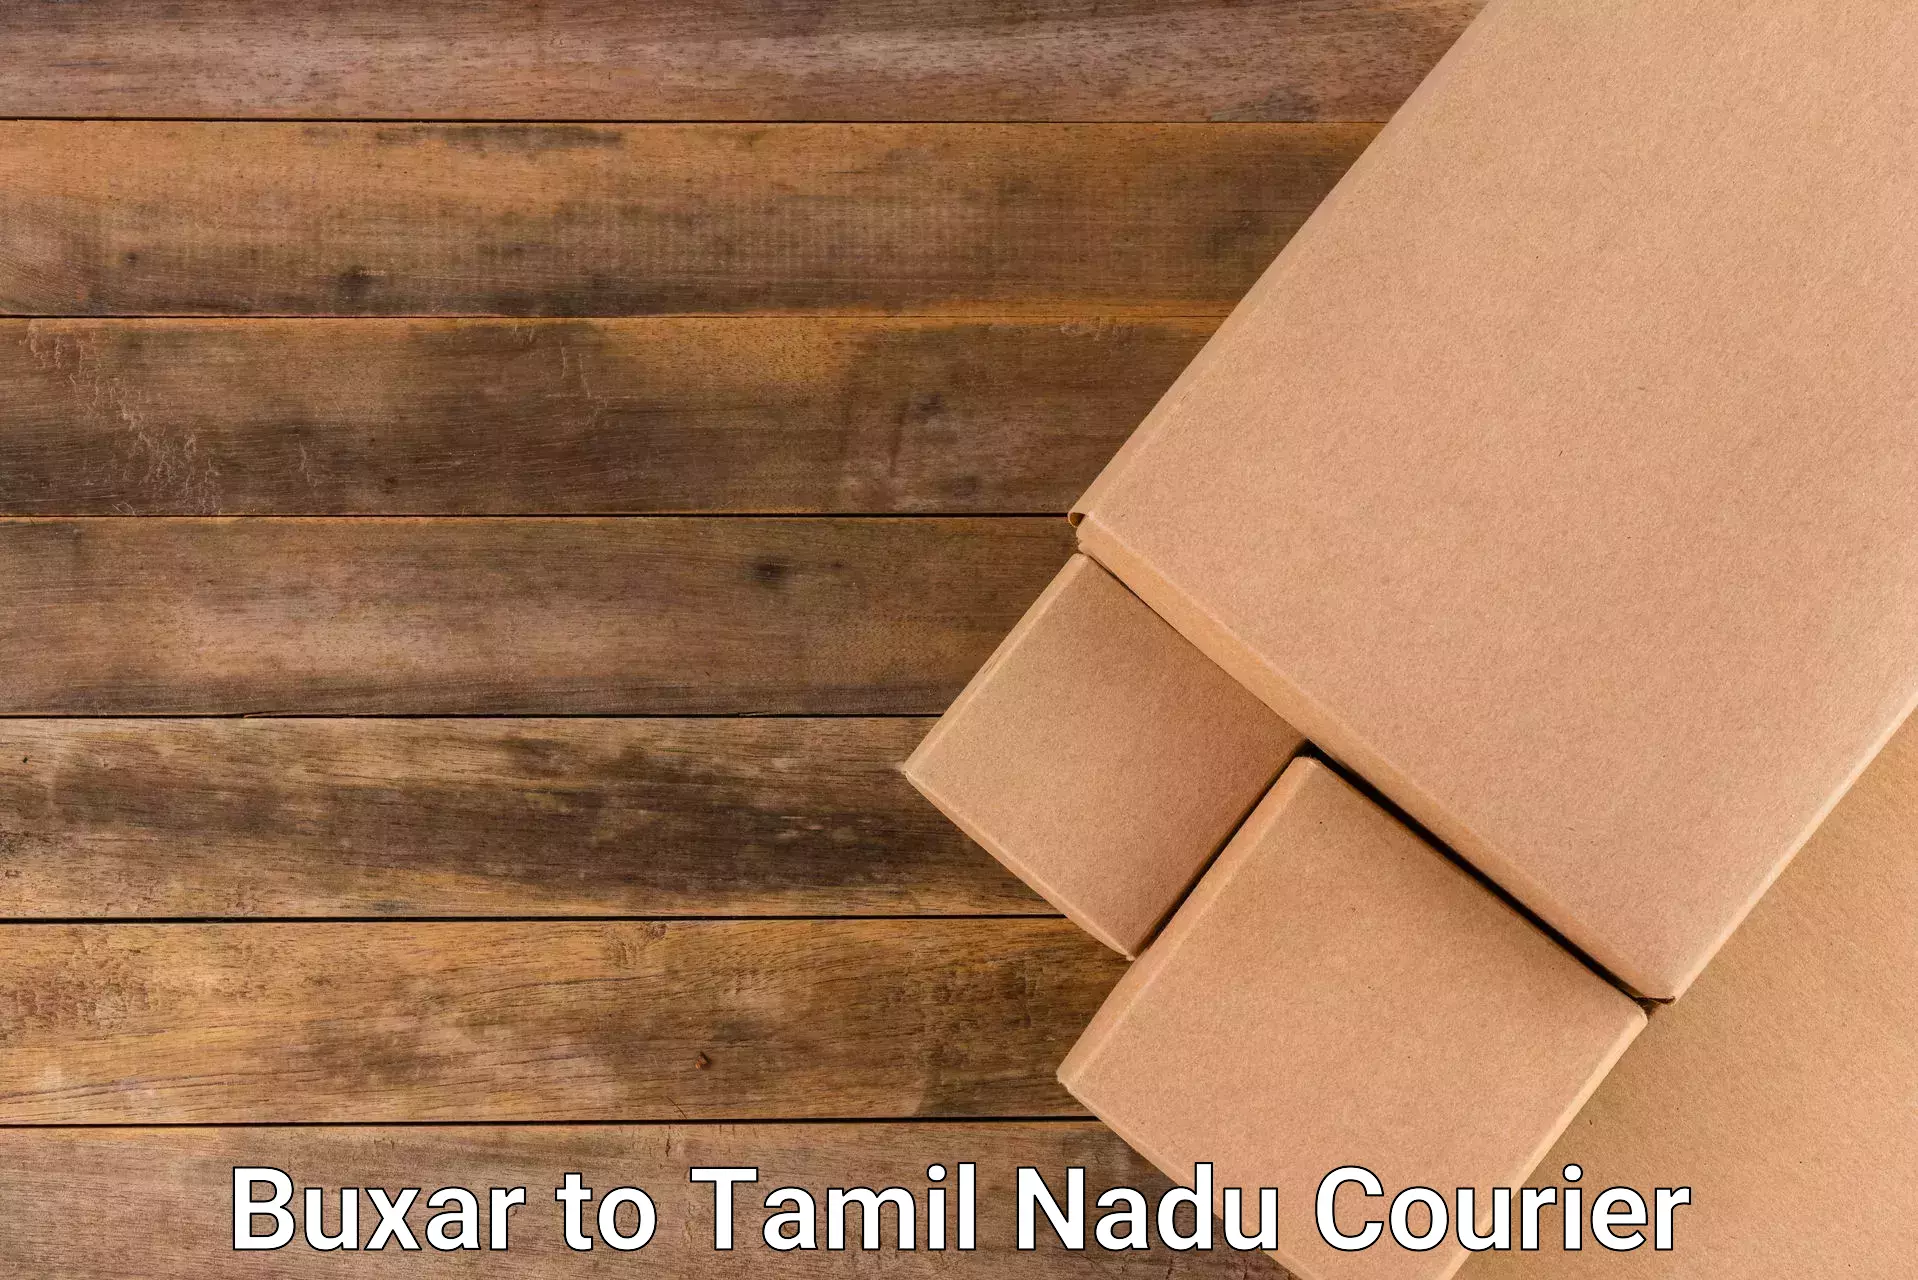 Secure package delivery in Buxar to Tamil Nadu